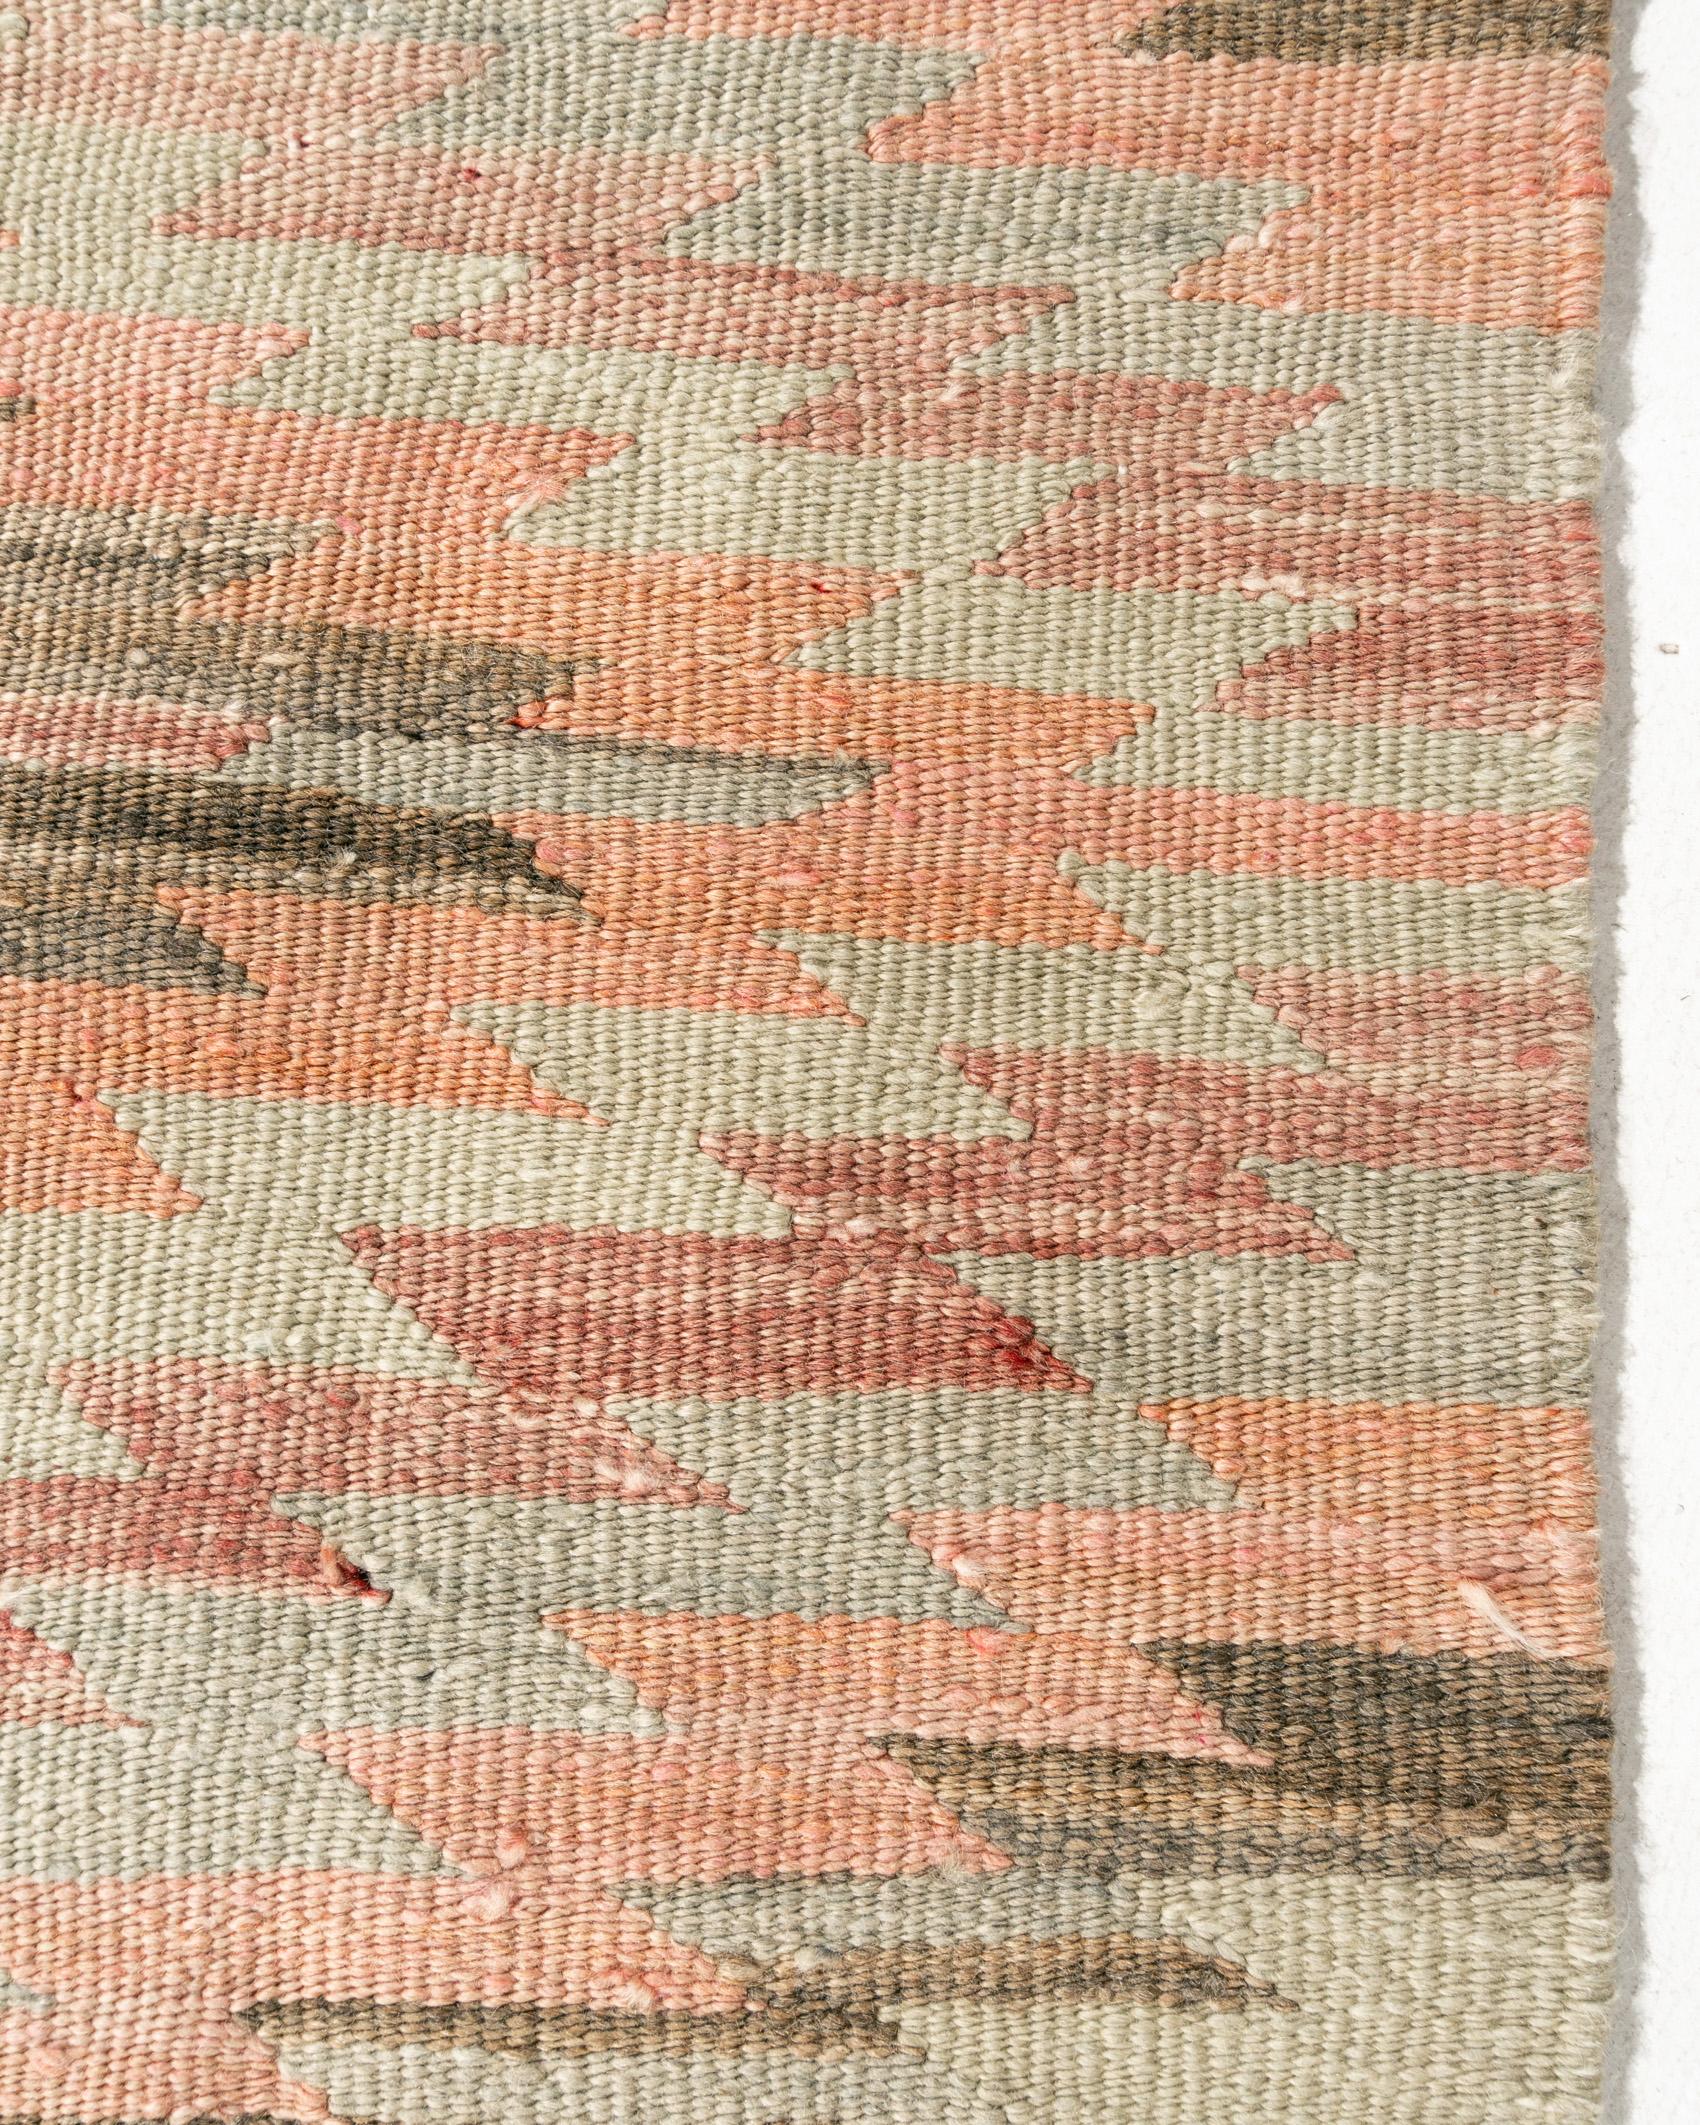 Vintage Turkish Kilim Area rug 5'4 X 9'5. This vintage Turkish flat weave Kilim was hand-woven in the 1940s. The simplicity and boldness of this piece can also give a contemporary feel and is able to look at home in both a modern and traditional